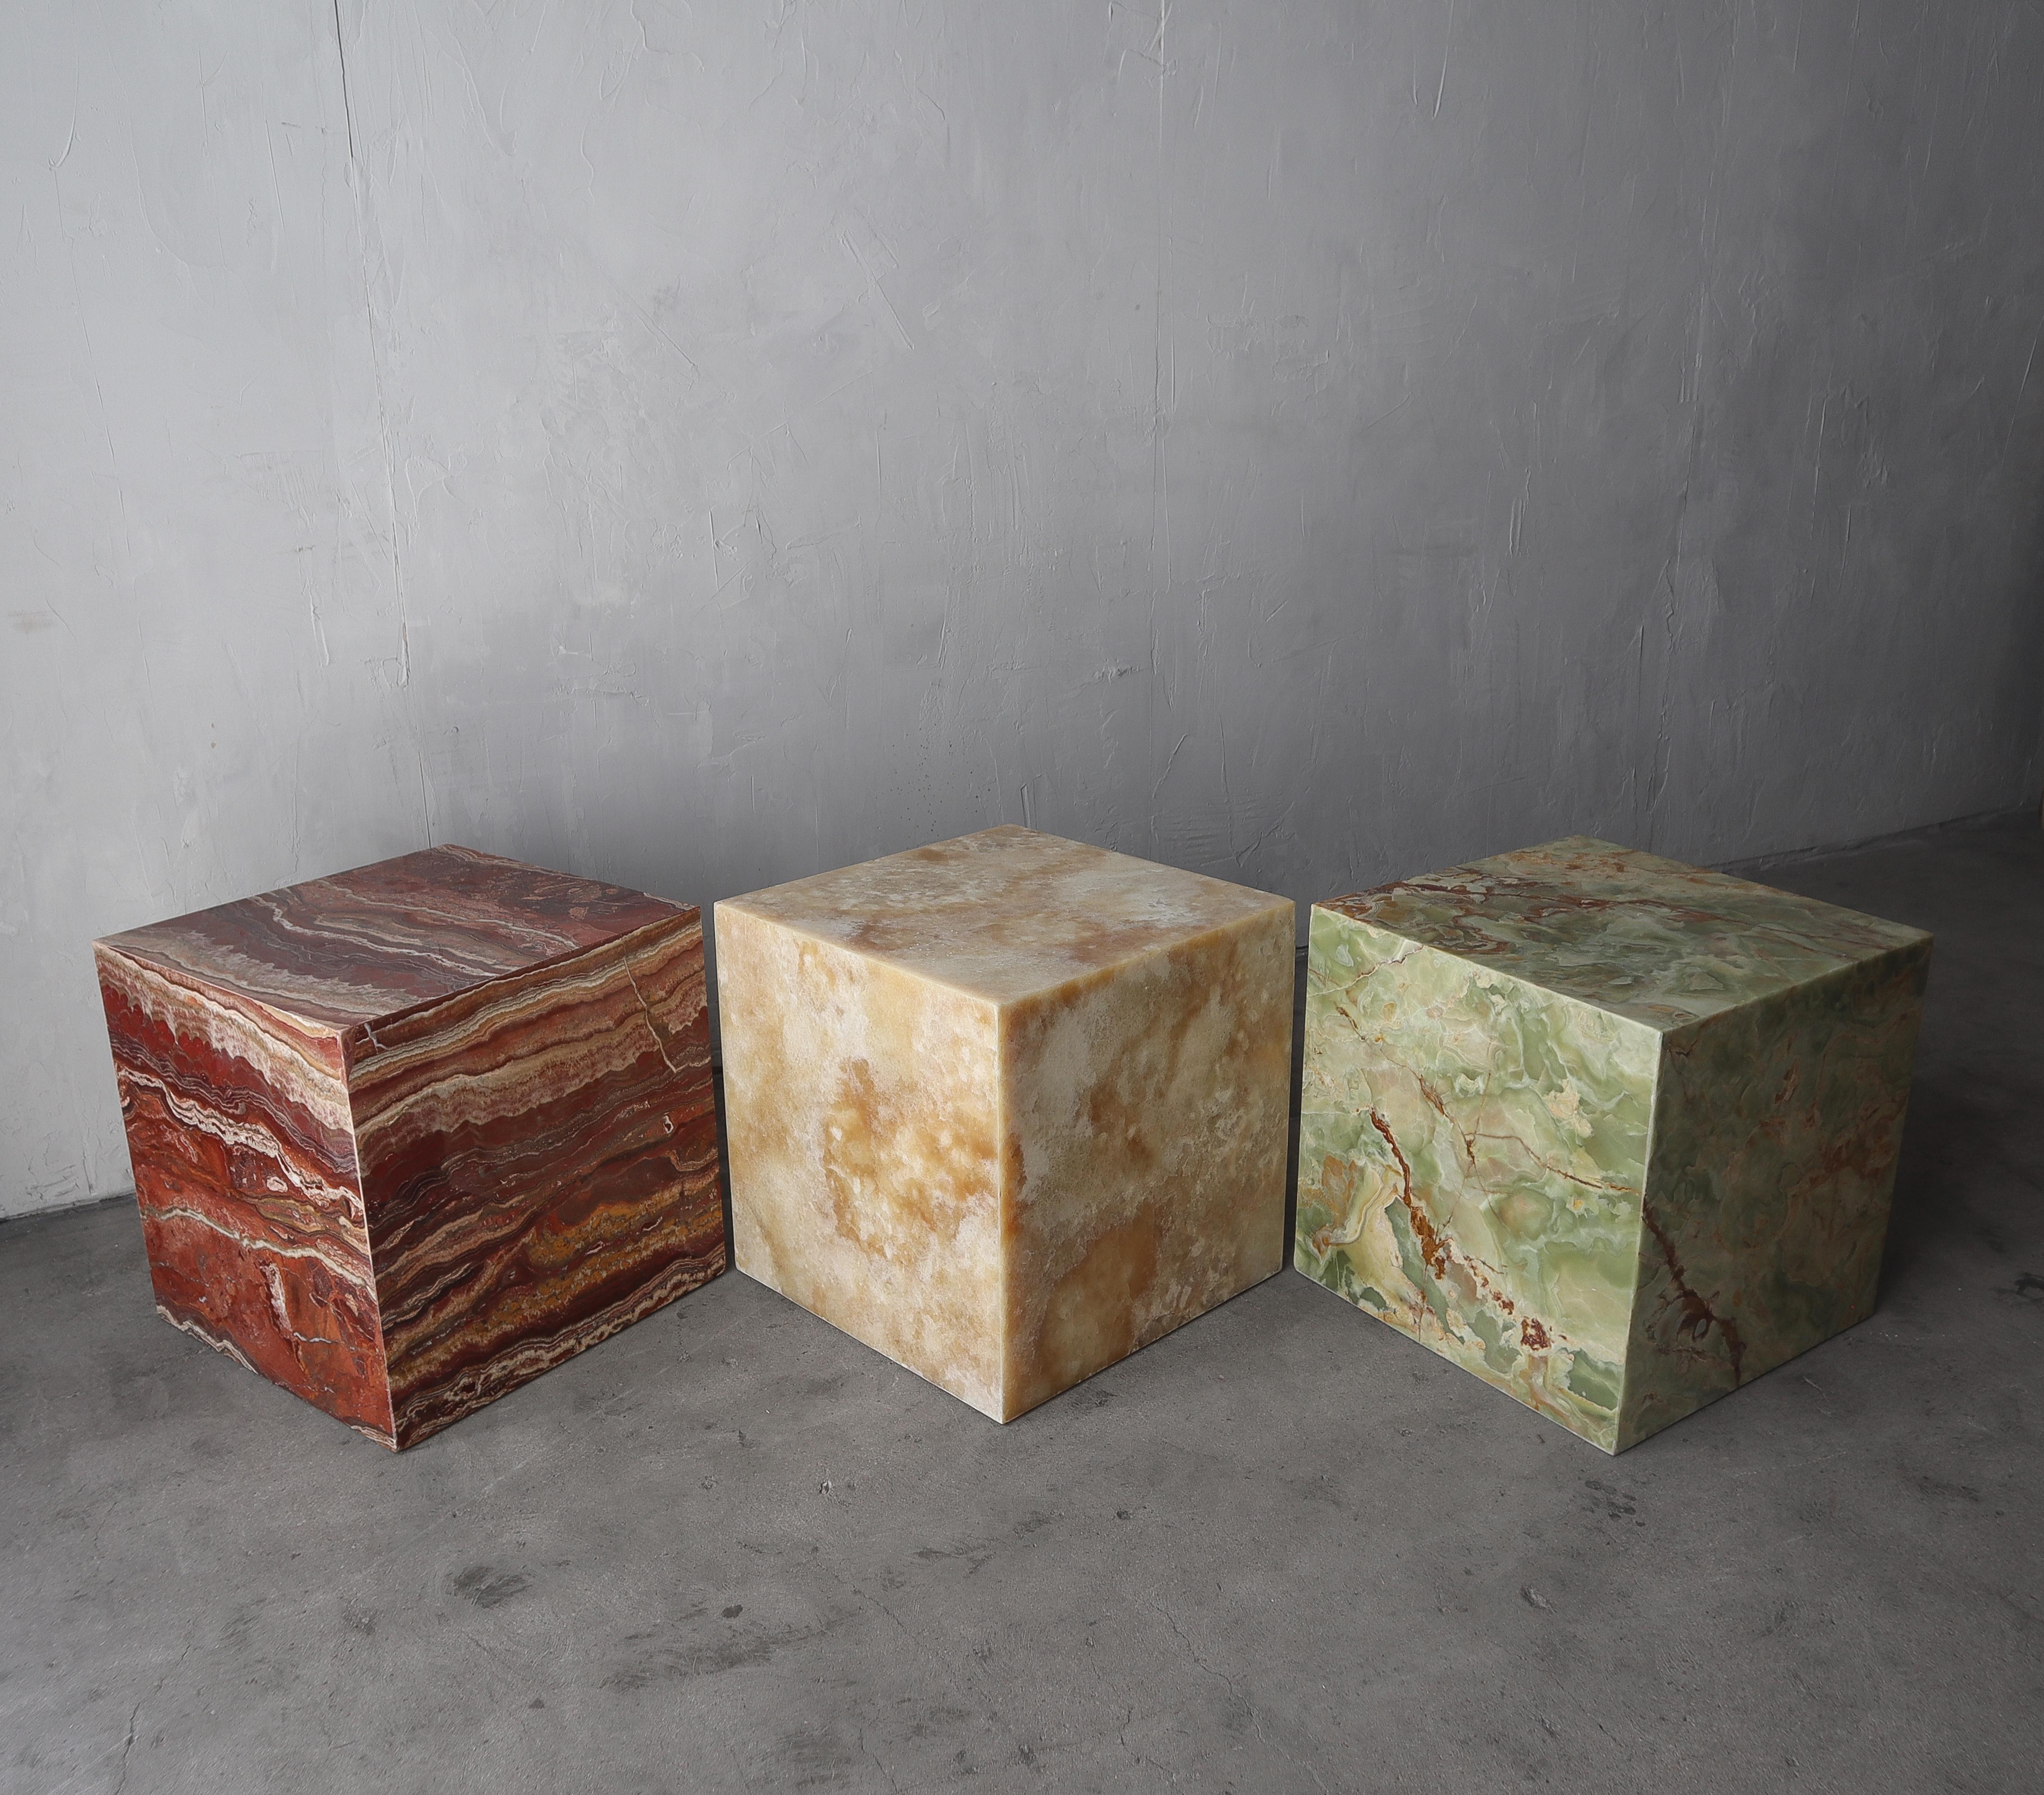 Stunning set of 3 custom made rolling Onyx cubes. They are made of the most gorgeous and heavily veined cuts of stone, 1 each, verde, honey and red onyx cube. They can be used separately or together as a show stopping collection. 

Each table